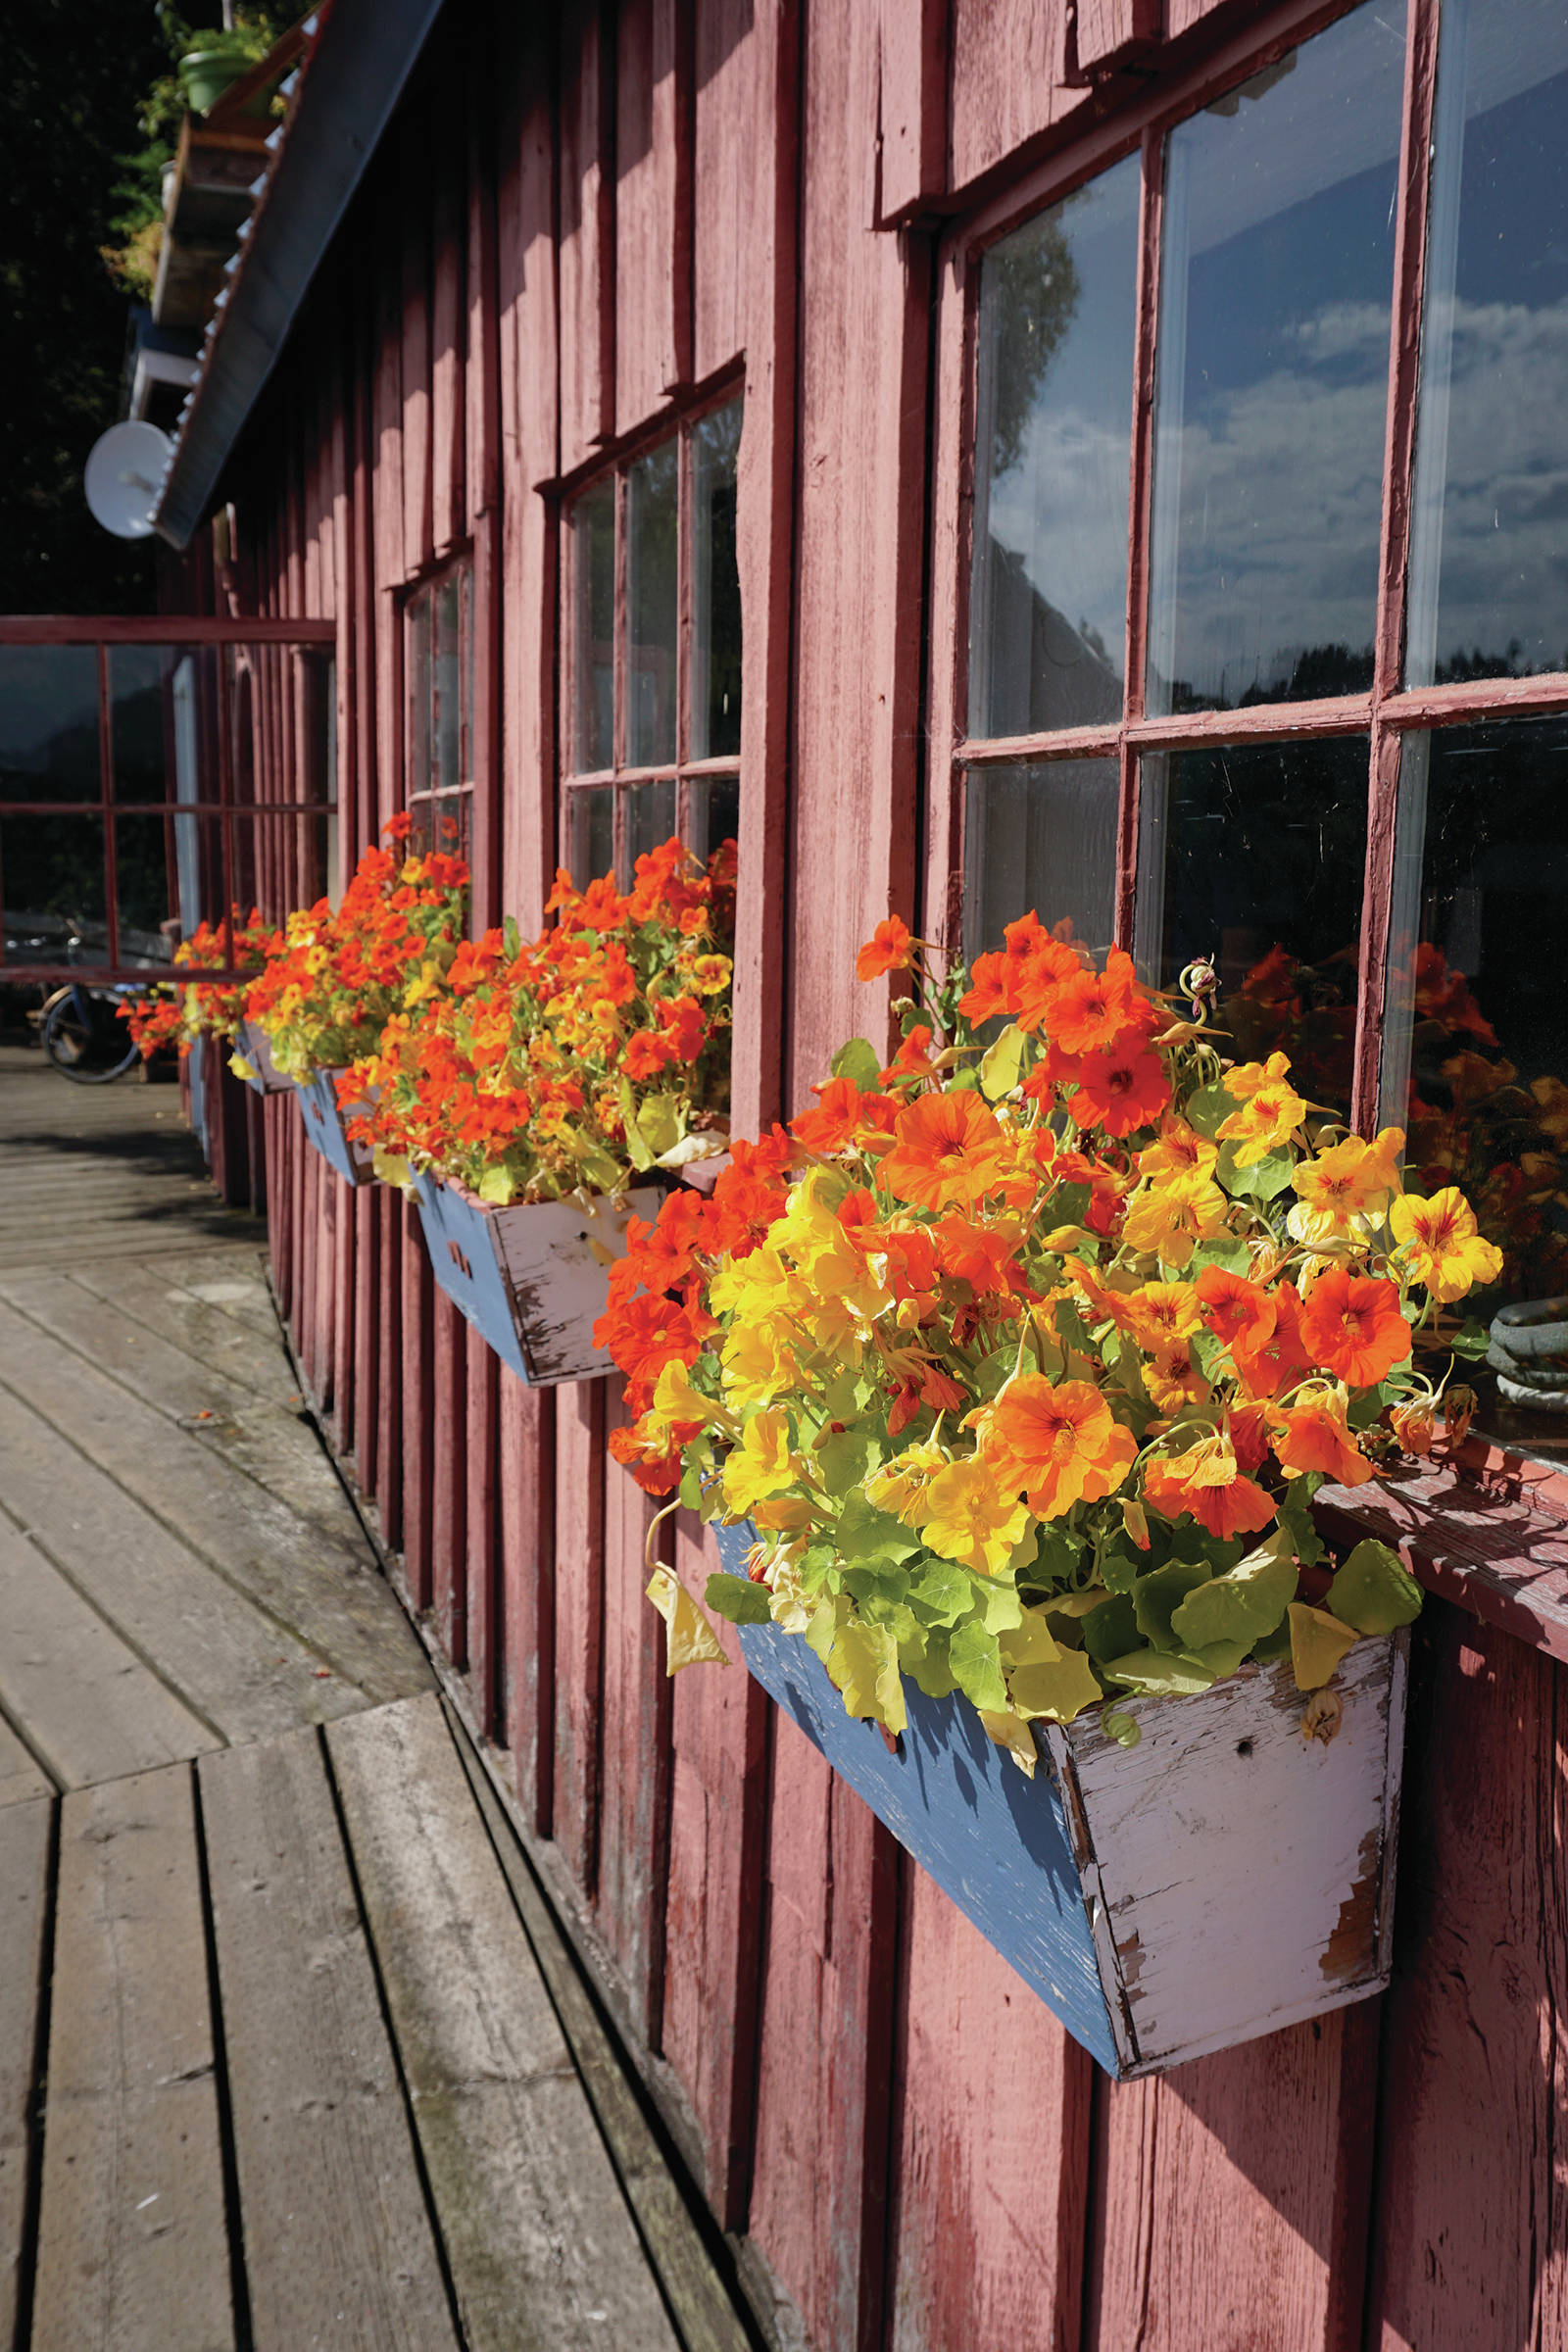 Pansies bloom in flower boxes on Aug. 10, 2019, by the Halibut Cove Coffee House in Halibut Cove, Alaska. (Photo by Michael Armstrong/Homer News)